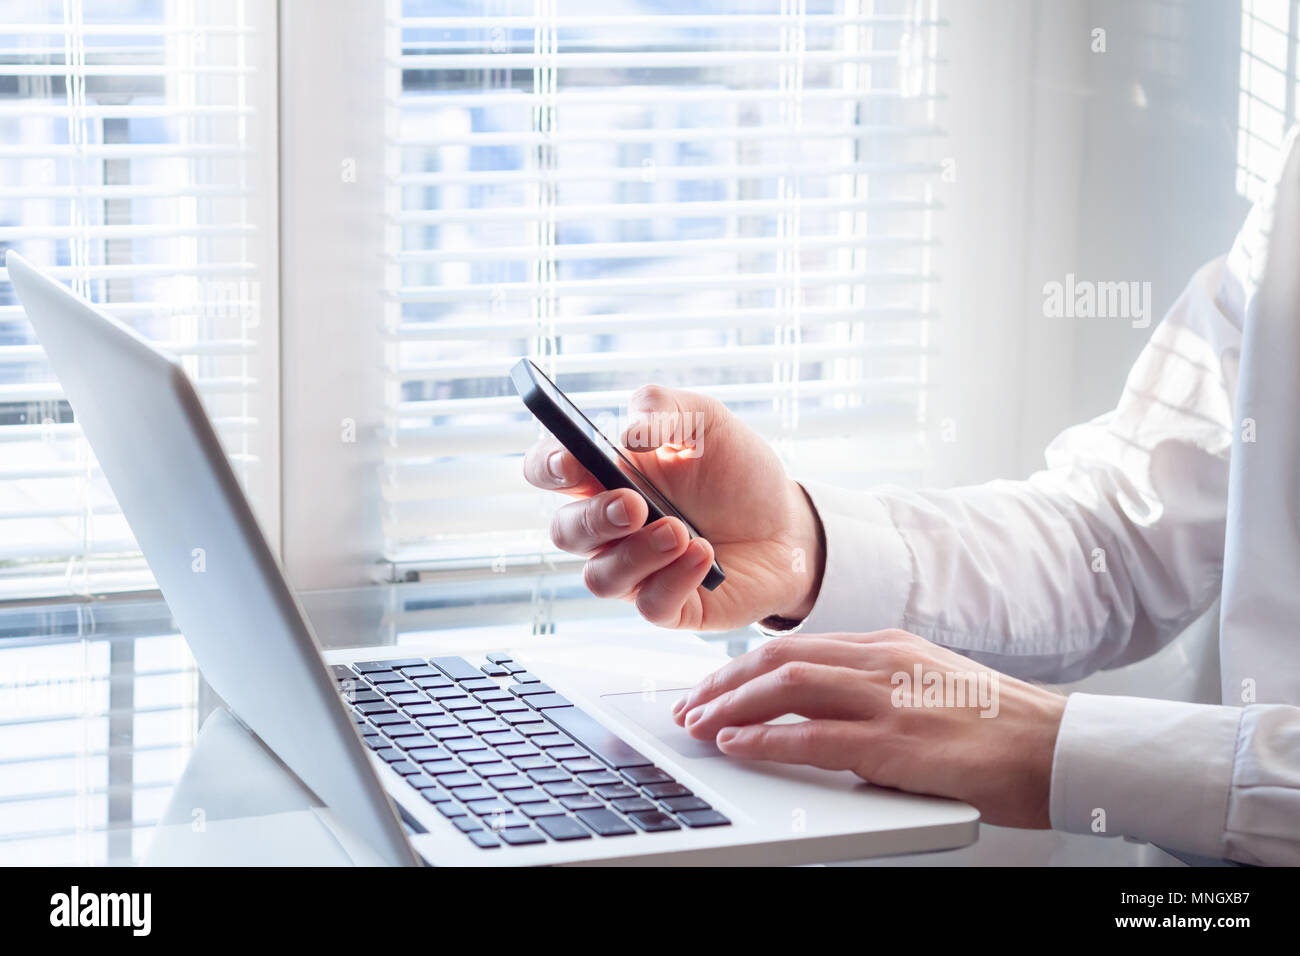 Businessman working with laptop computer and smartphone in bright office, financial accountant, corporate business investment consultant Stock Photo